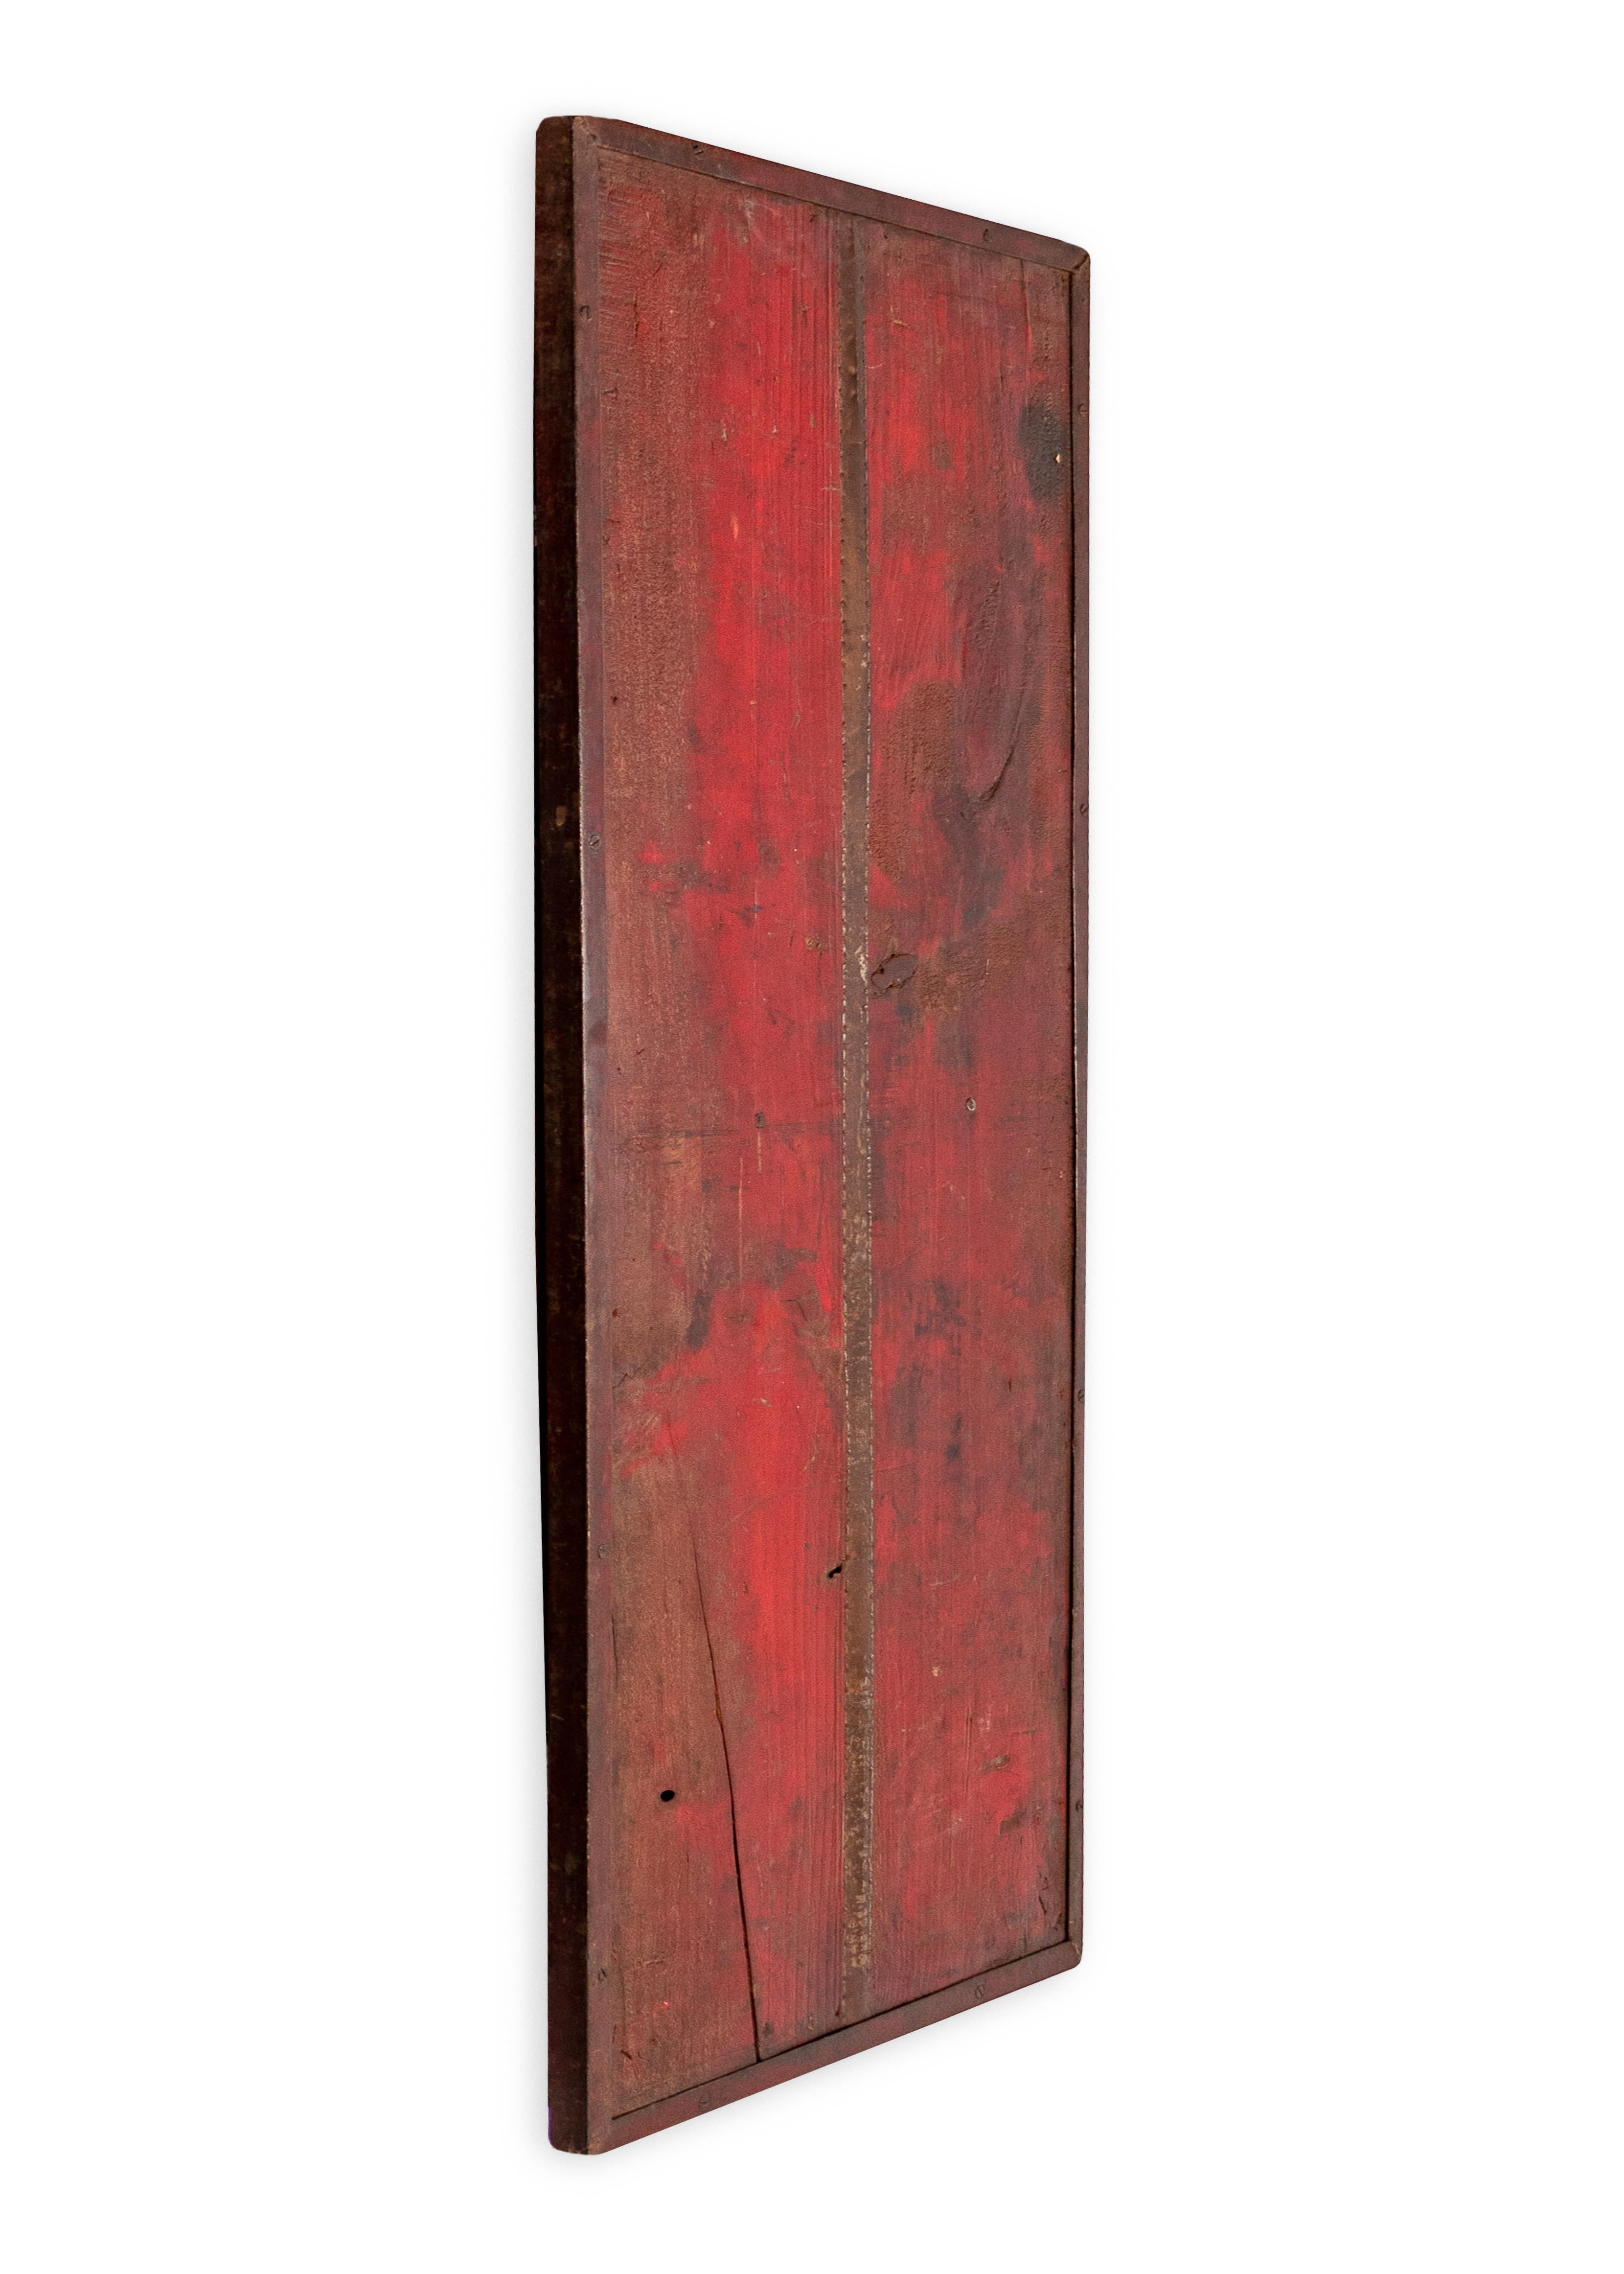 Multi tone red wood wall panel with reclaimed metal elements. In my organic, contemporary, vintage and mid-century modern aesthetic.

This piece is a part of Brendan Bass’s one-of-a-kind collection, Le Monde. French for “The World”, the Le Monde